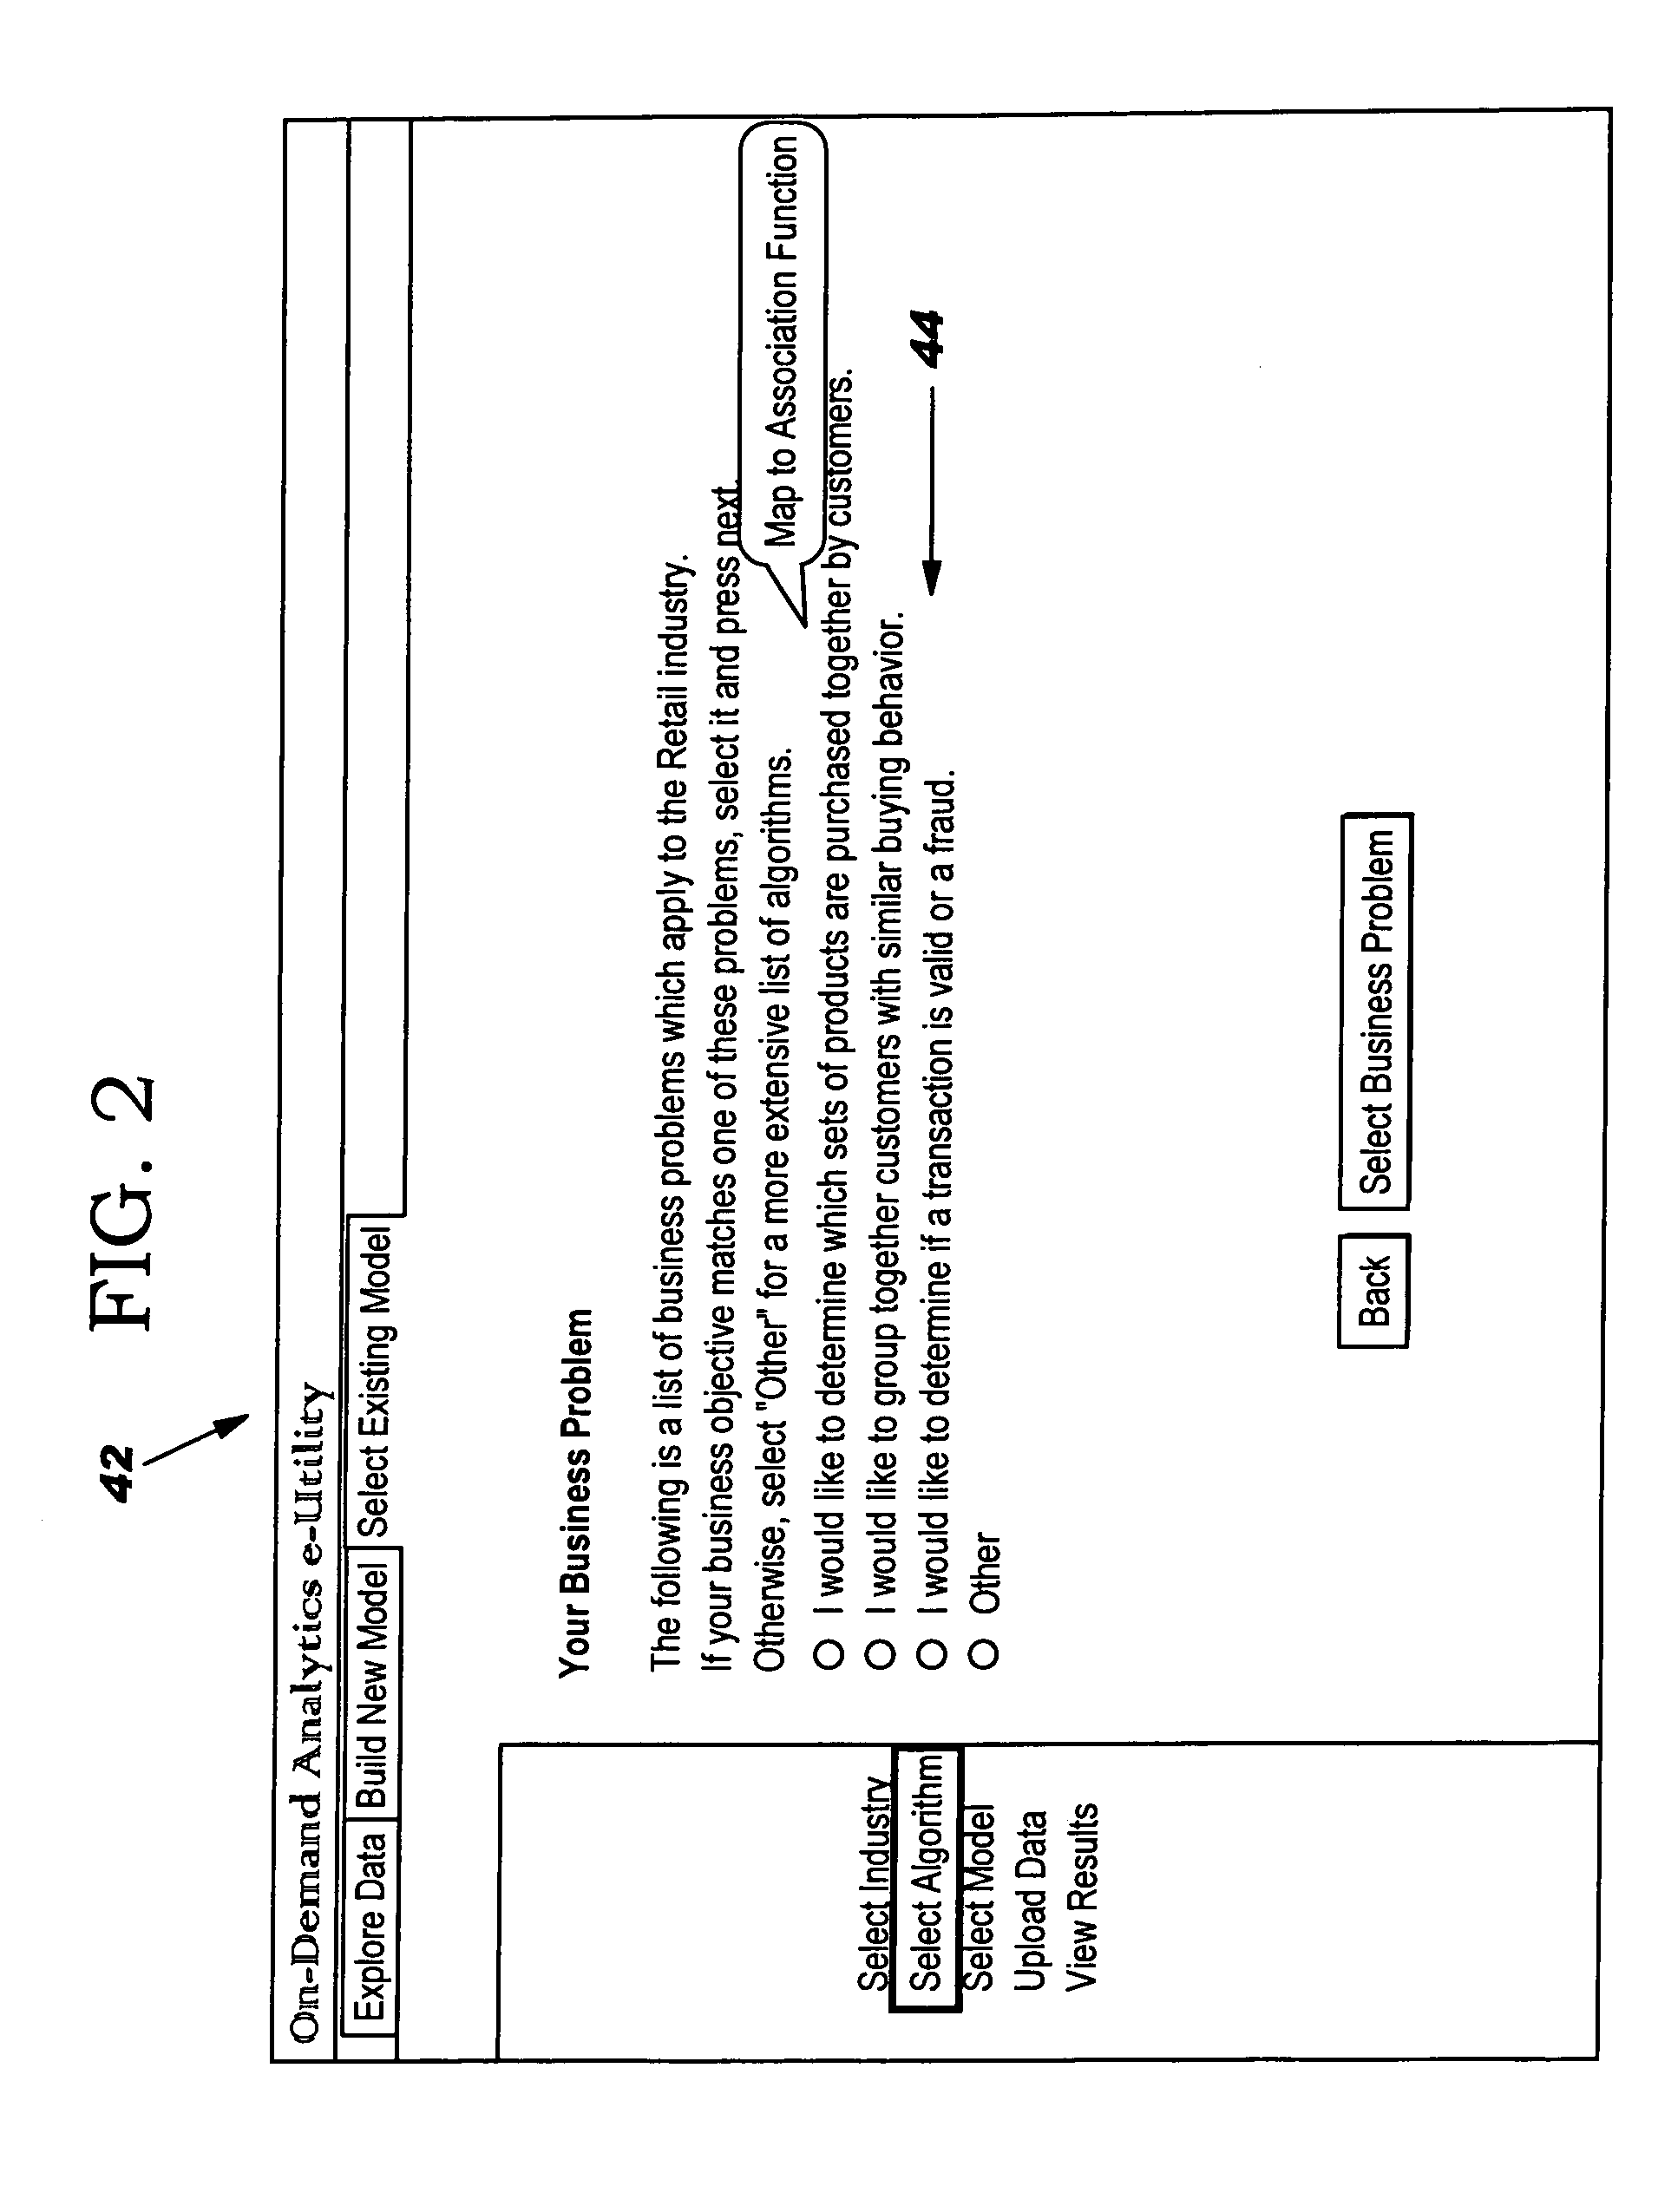 Computerized data mining system, method and program product